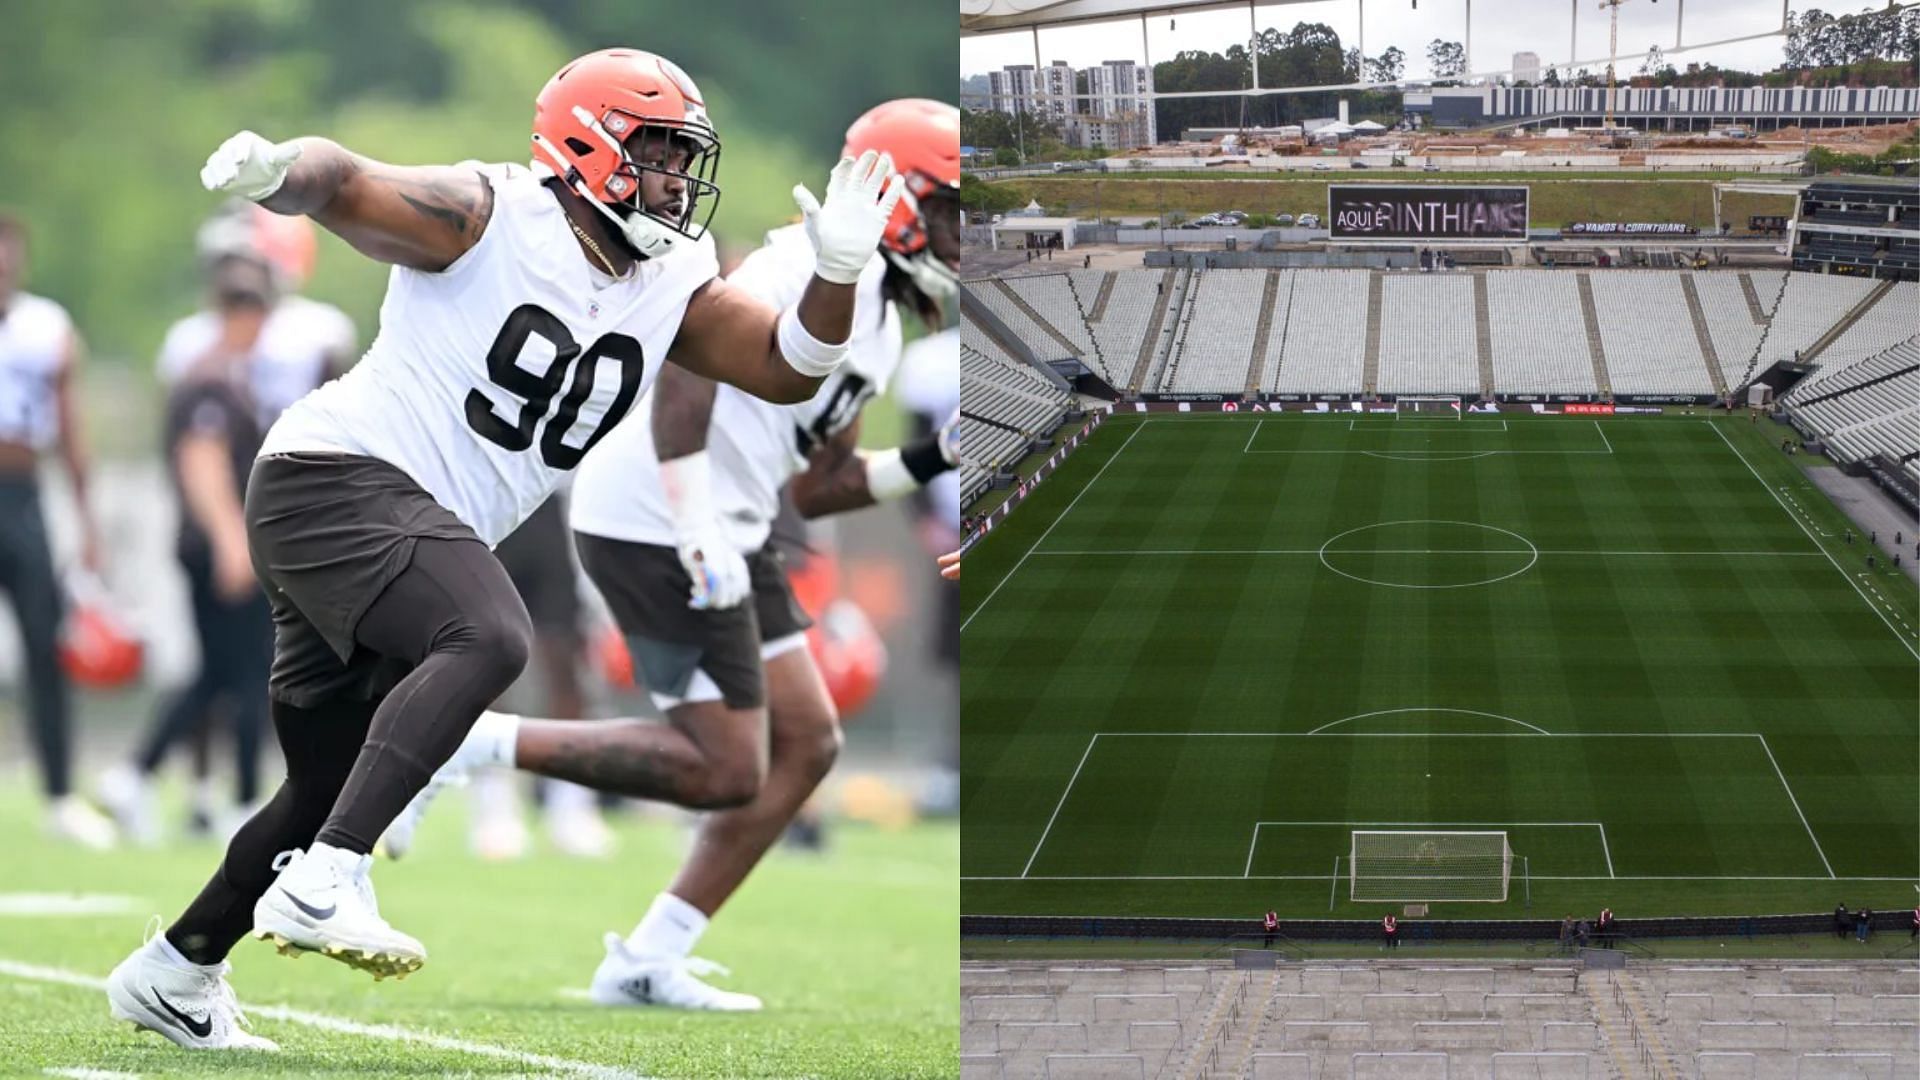 Maurice Hurst thinks the Browns will play in Sao Paulo